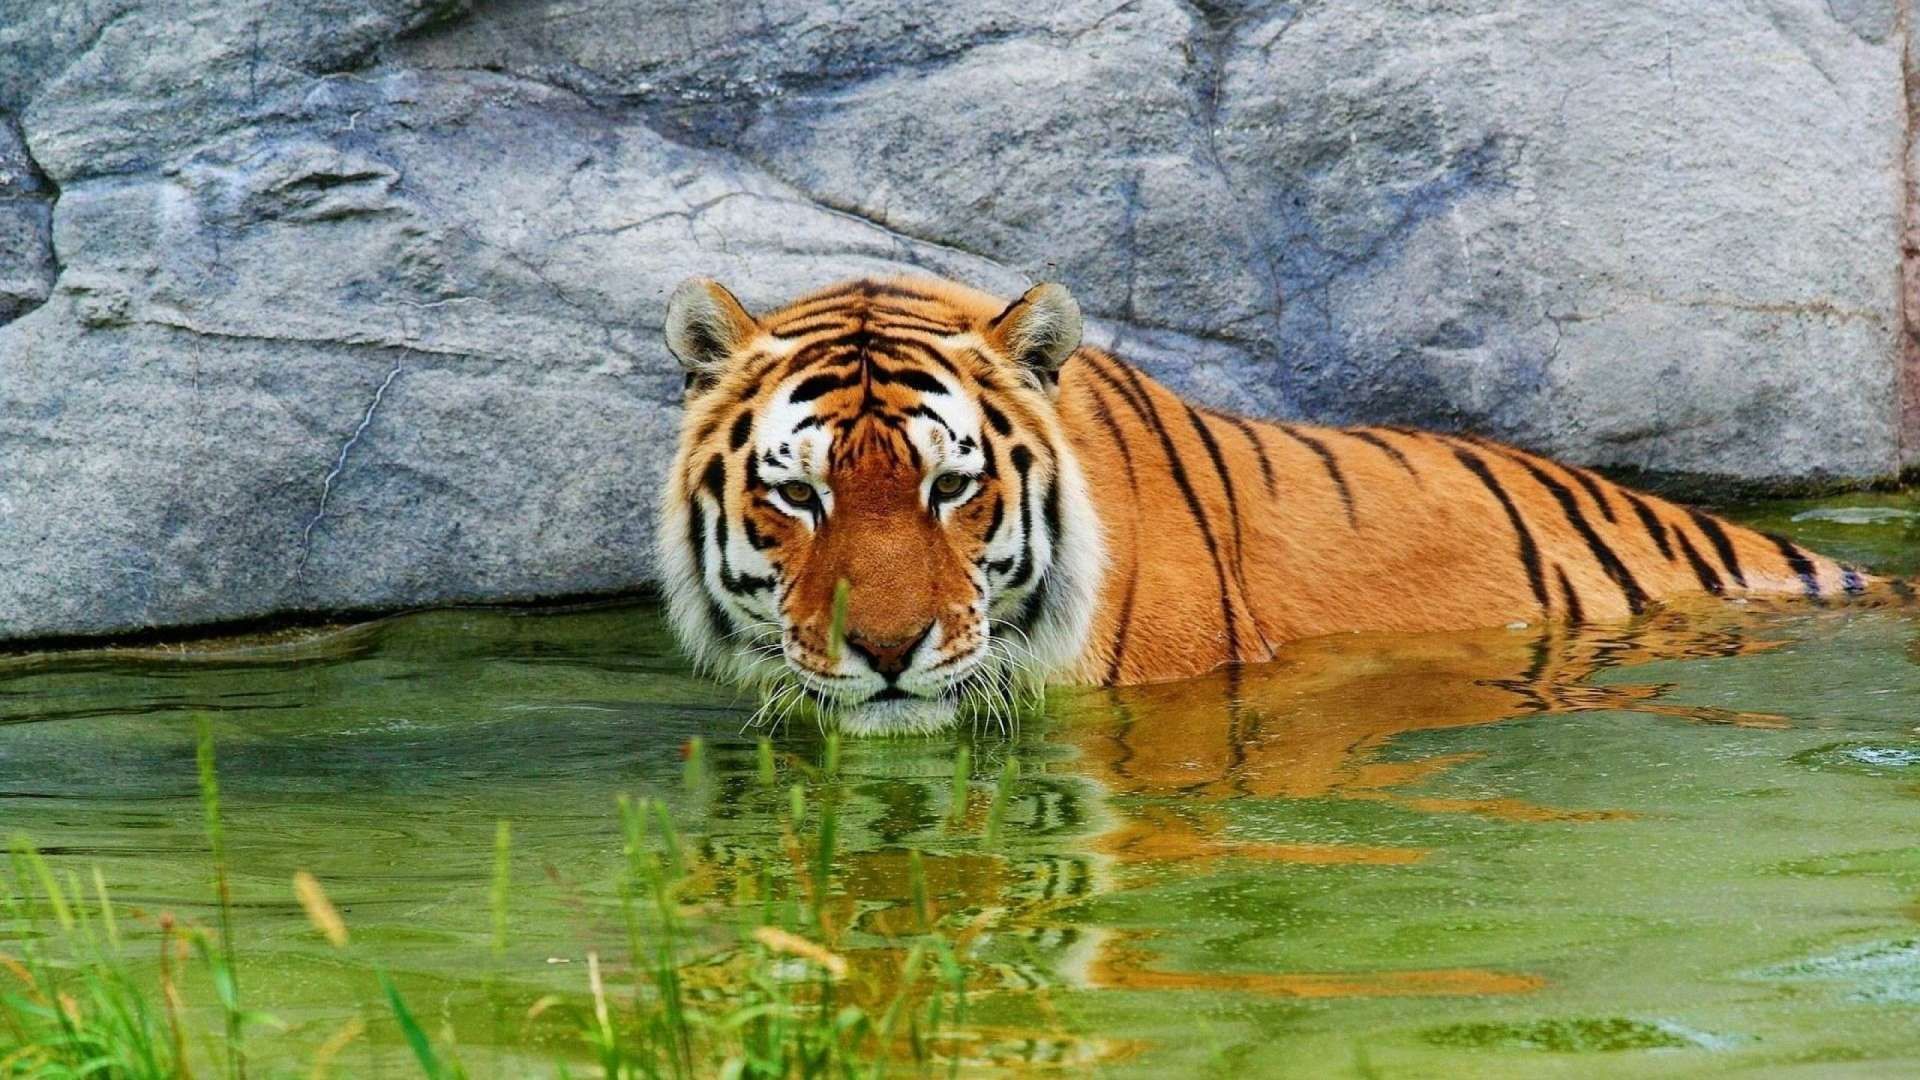 South china tiger HD free download wallpaper. Tiger in water, Tiger wallpaper, Most endangered animals